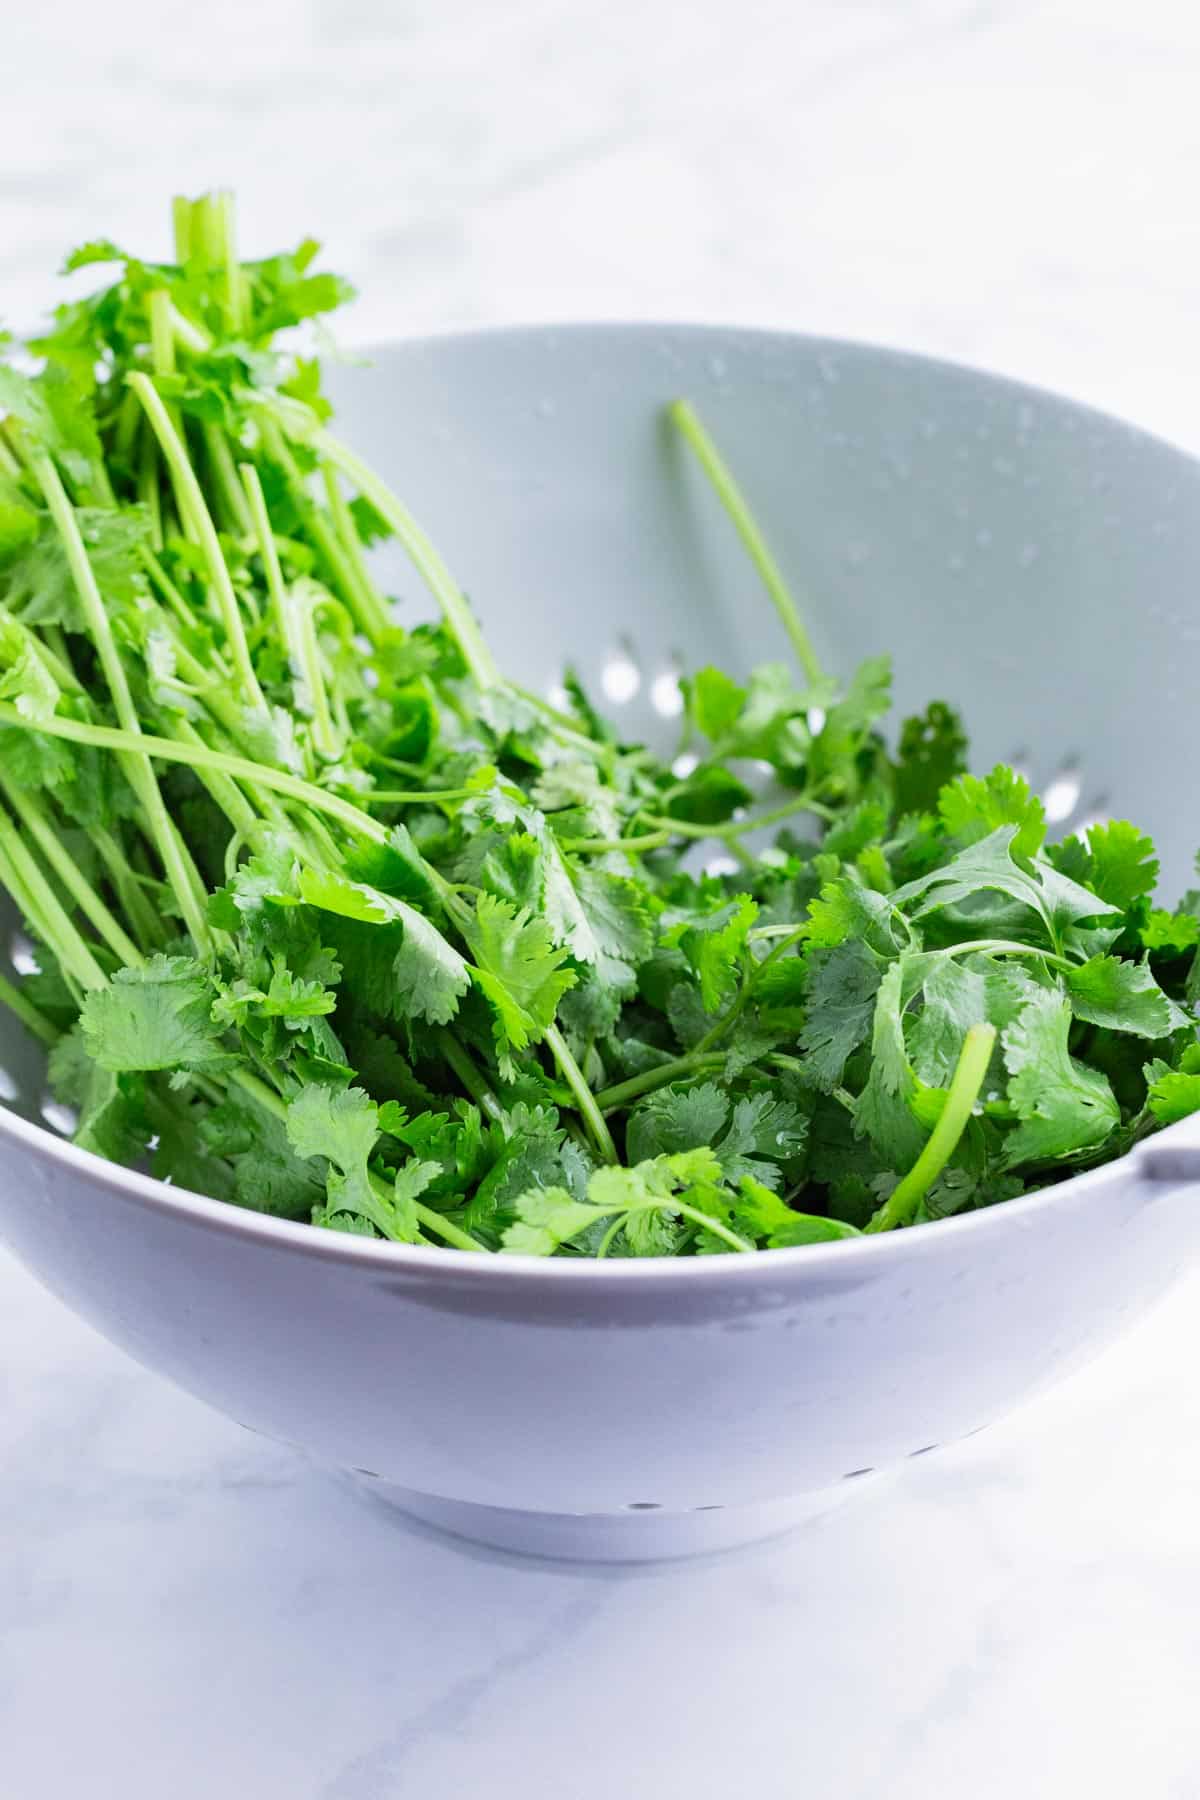 Cilantro is rinsed in a bowl.